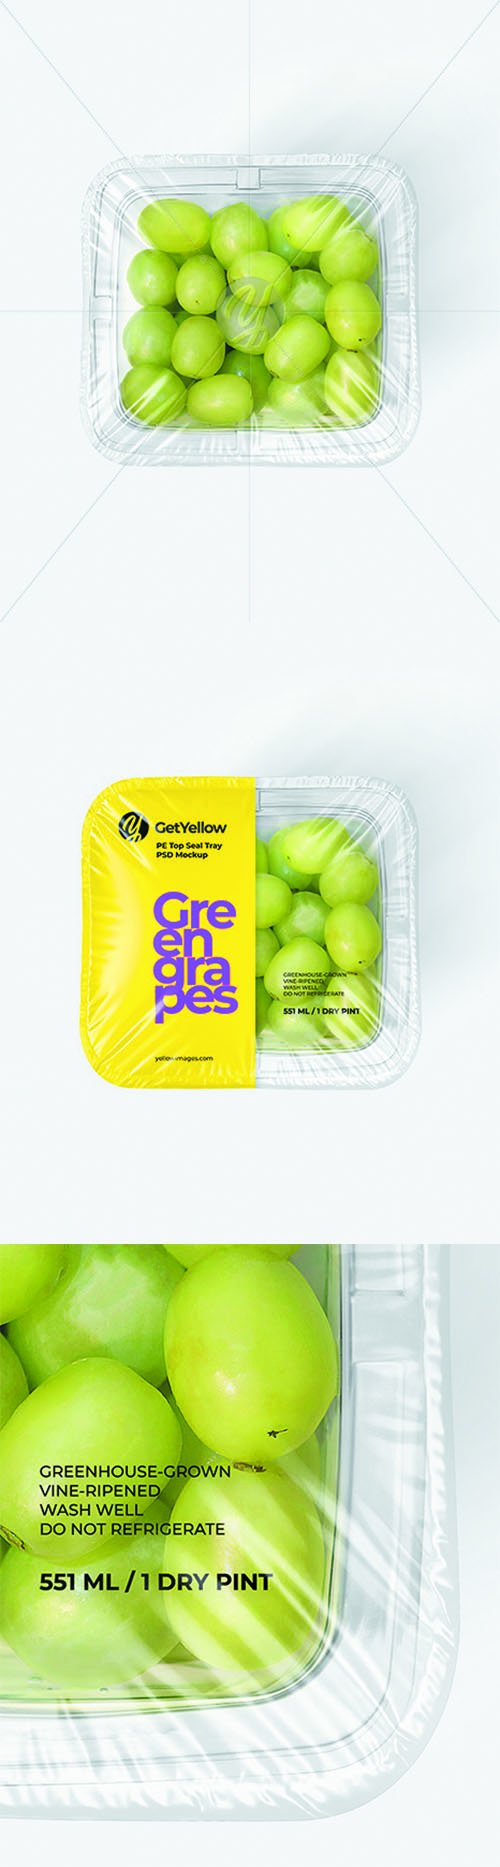 Clear Plastic Tray with Green Grapes Mockup 68893 TIF